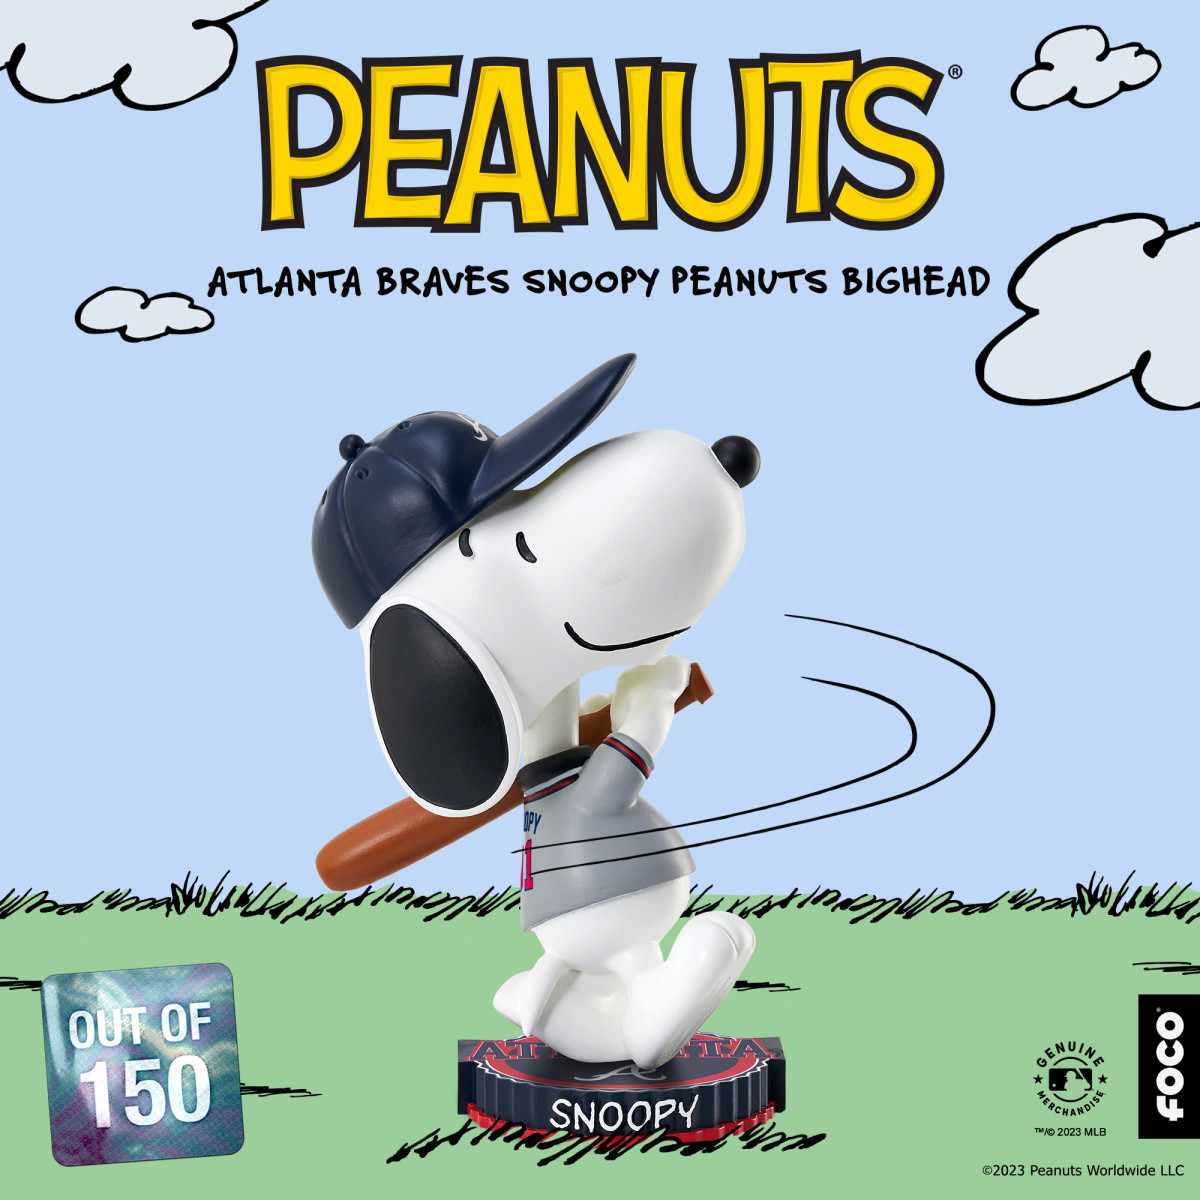 Beloved Peanuts character Snoopy is teaming up with FOCO for a new